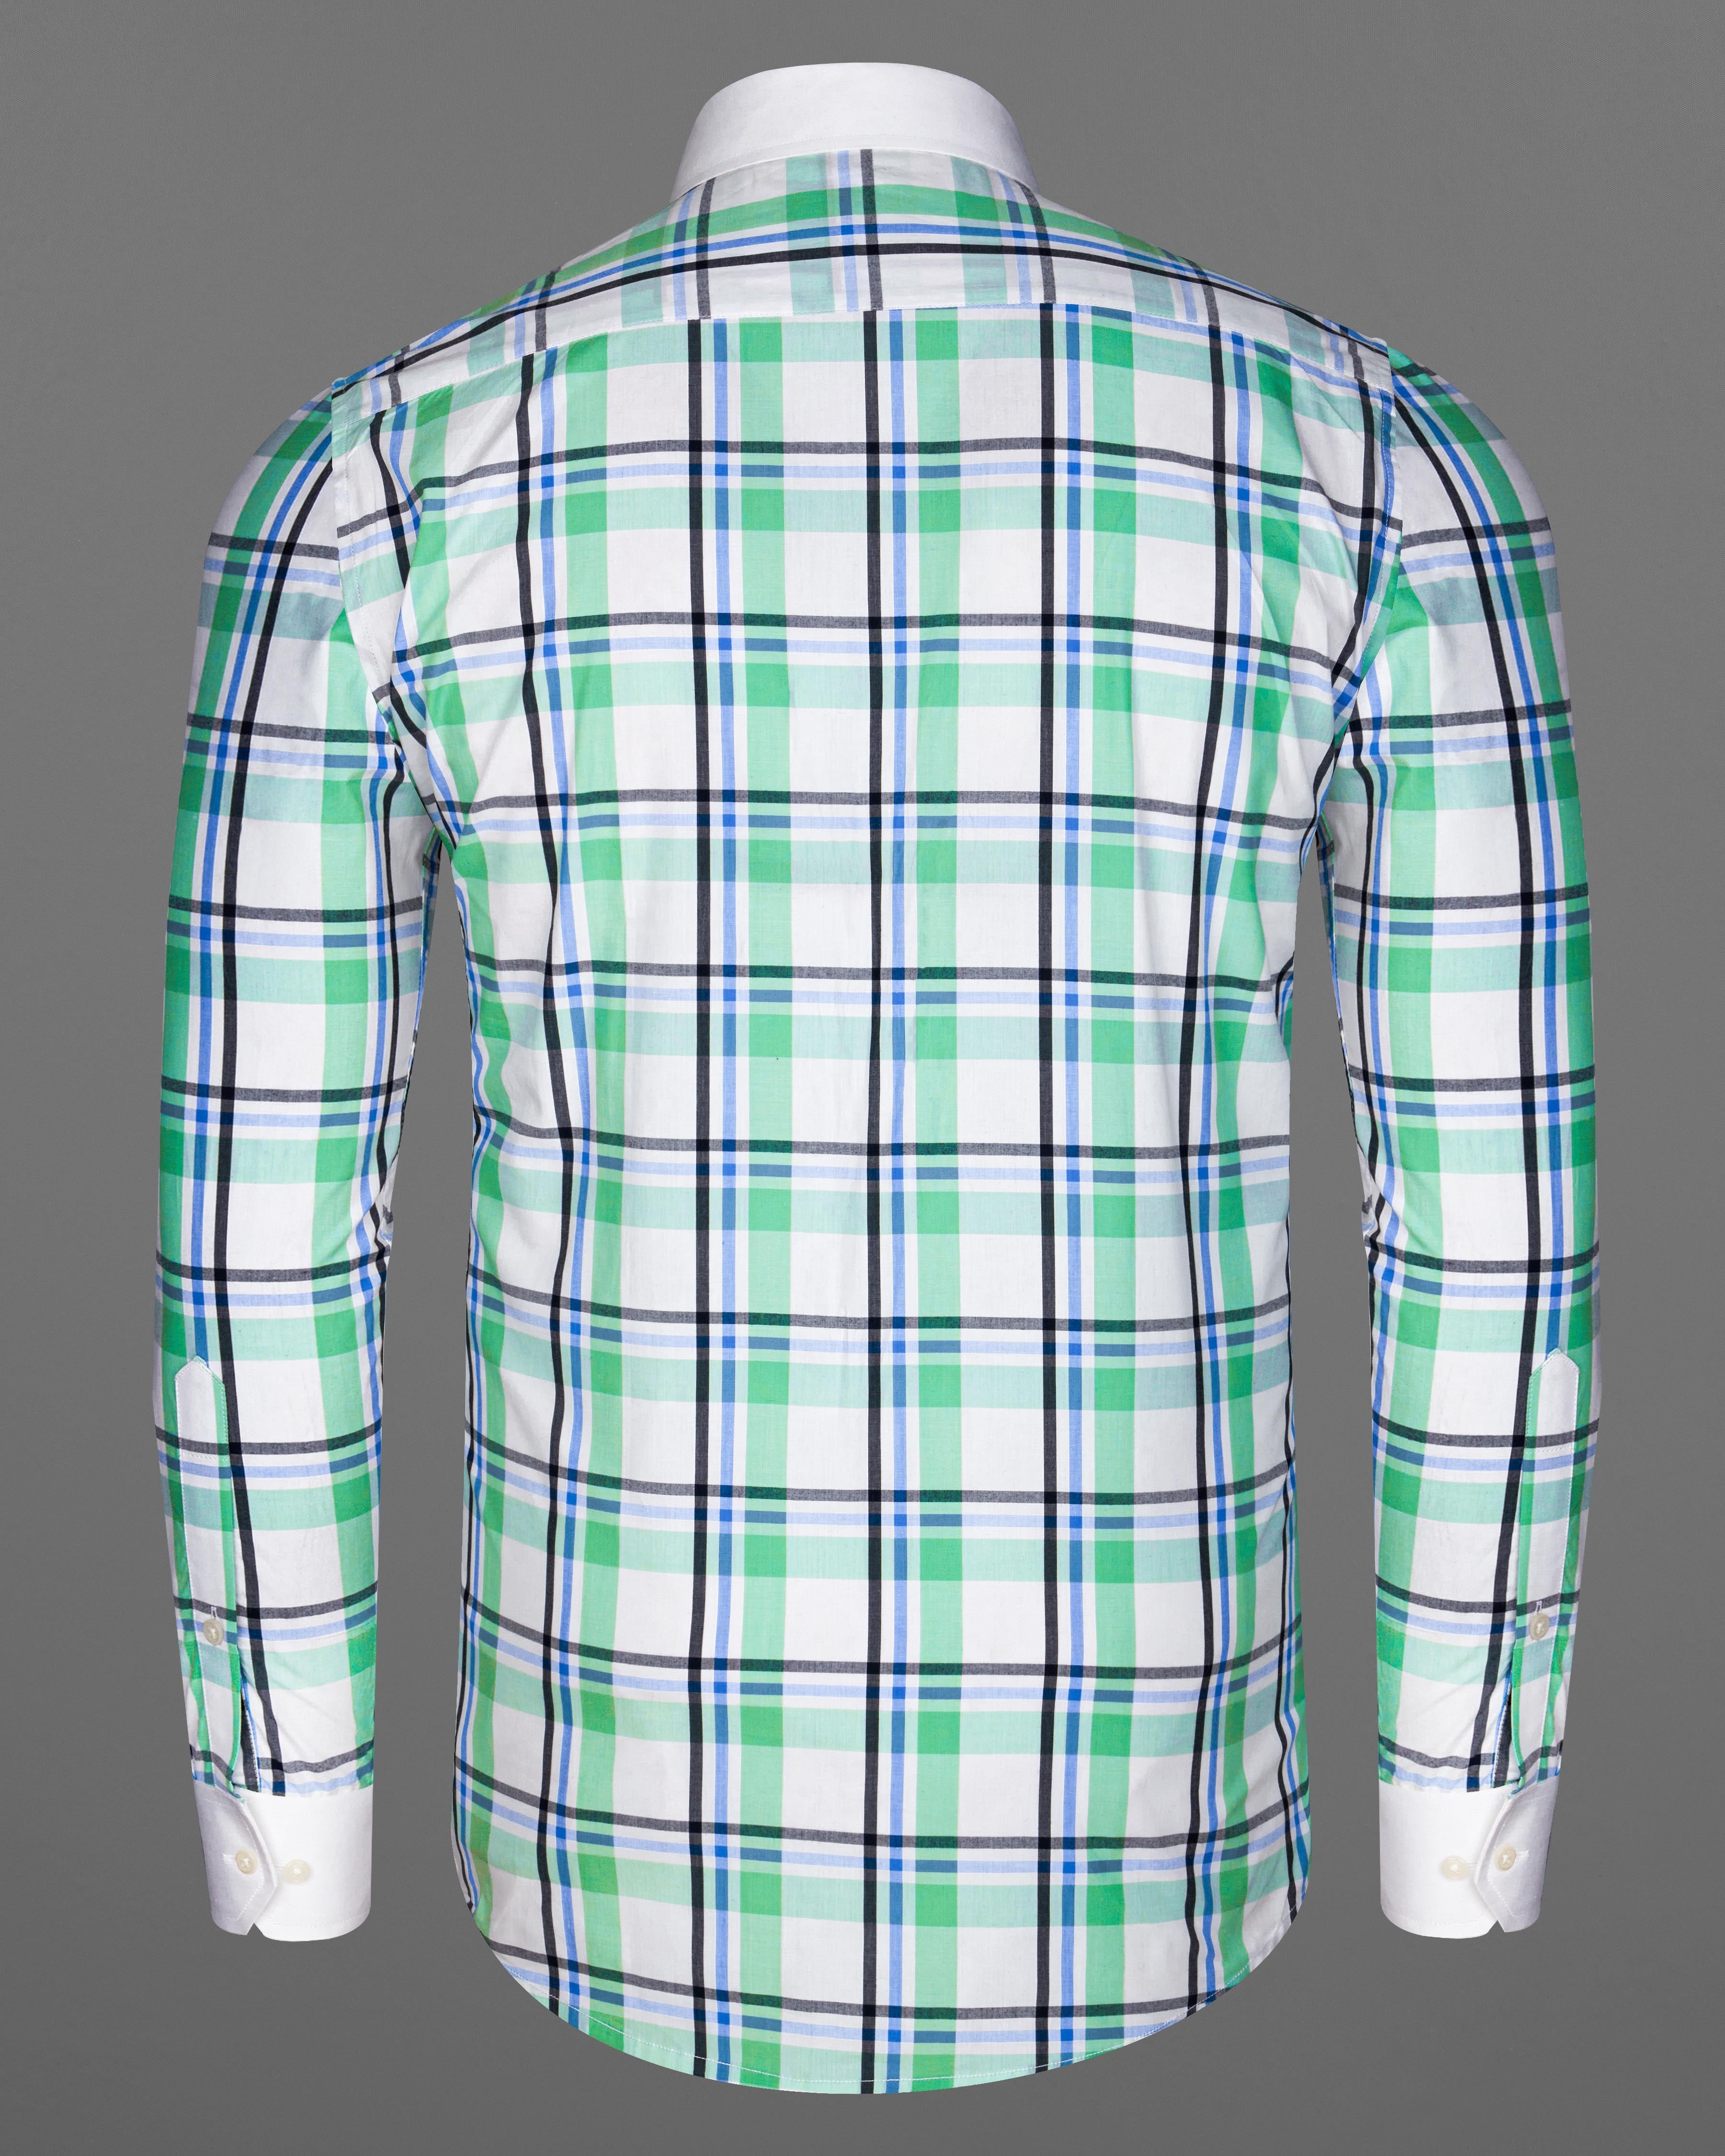 Bright White with Oxley Green and Black Windowpane Premium Cotton Shirt 8711-WCC-38, 8711-WCC-H-38, 8711-WCC-39, 8711-WCC-H-39, 8711-WCC-40, 8711-WCC-H-40, 8711-WCC-42, 8711-WCC-H-42, 8711-WCC-44, 8711-WCC-H-44, 8711-WCC-46, 8711-WCC-H-46, 8711-WCC-48, 8711-WCC-H-48, 8711-WCC-50, 8711-WCC-H-50, 8711-WCC-52, 8711-WCC-H-52